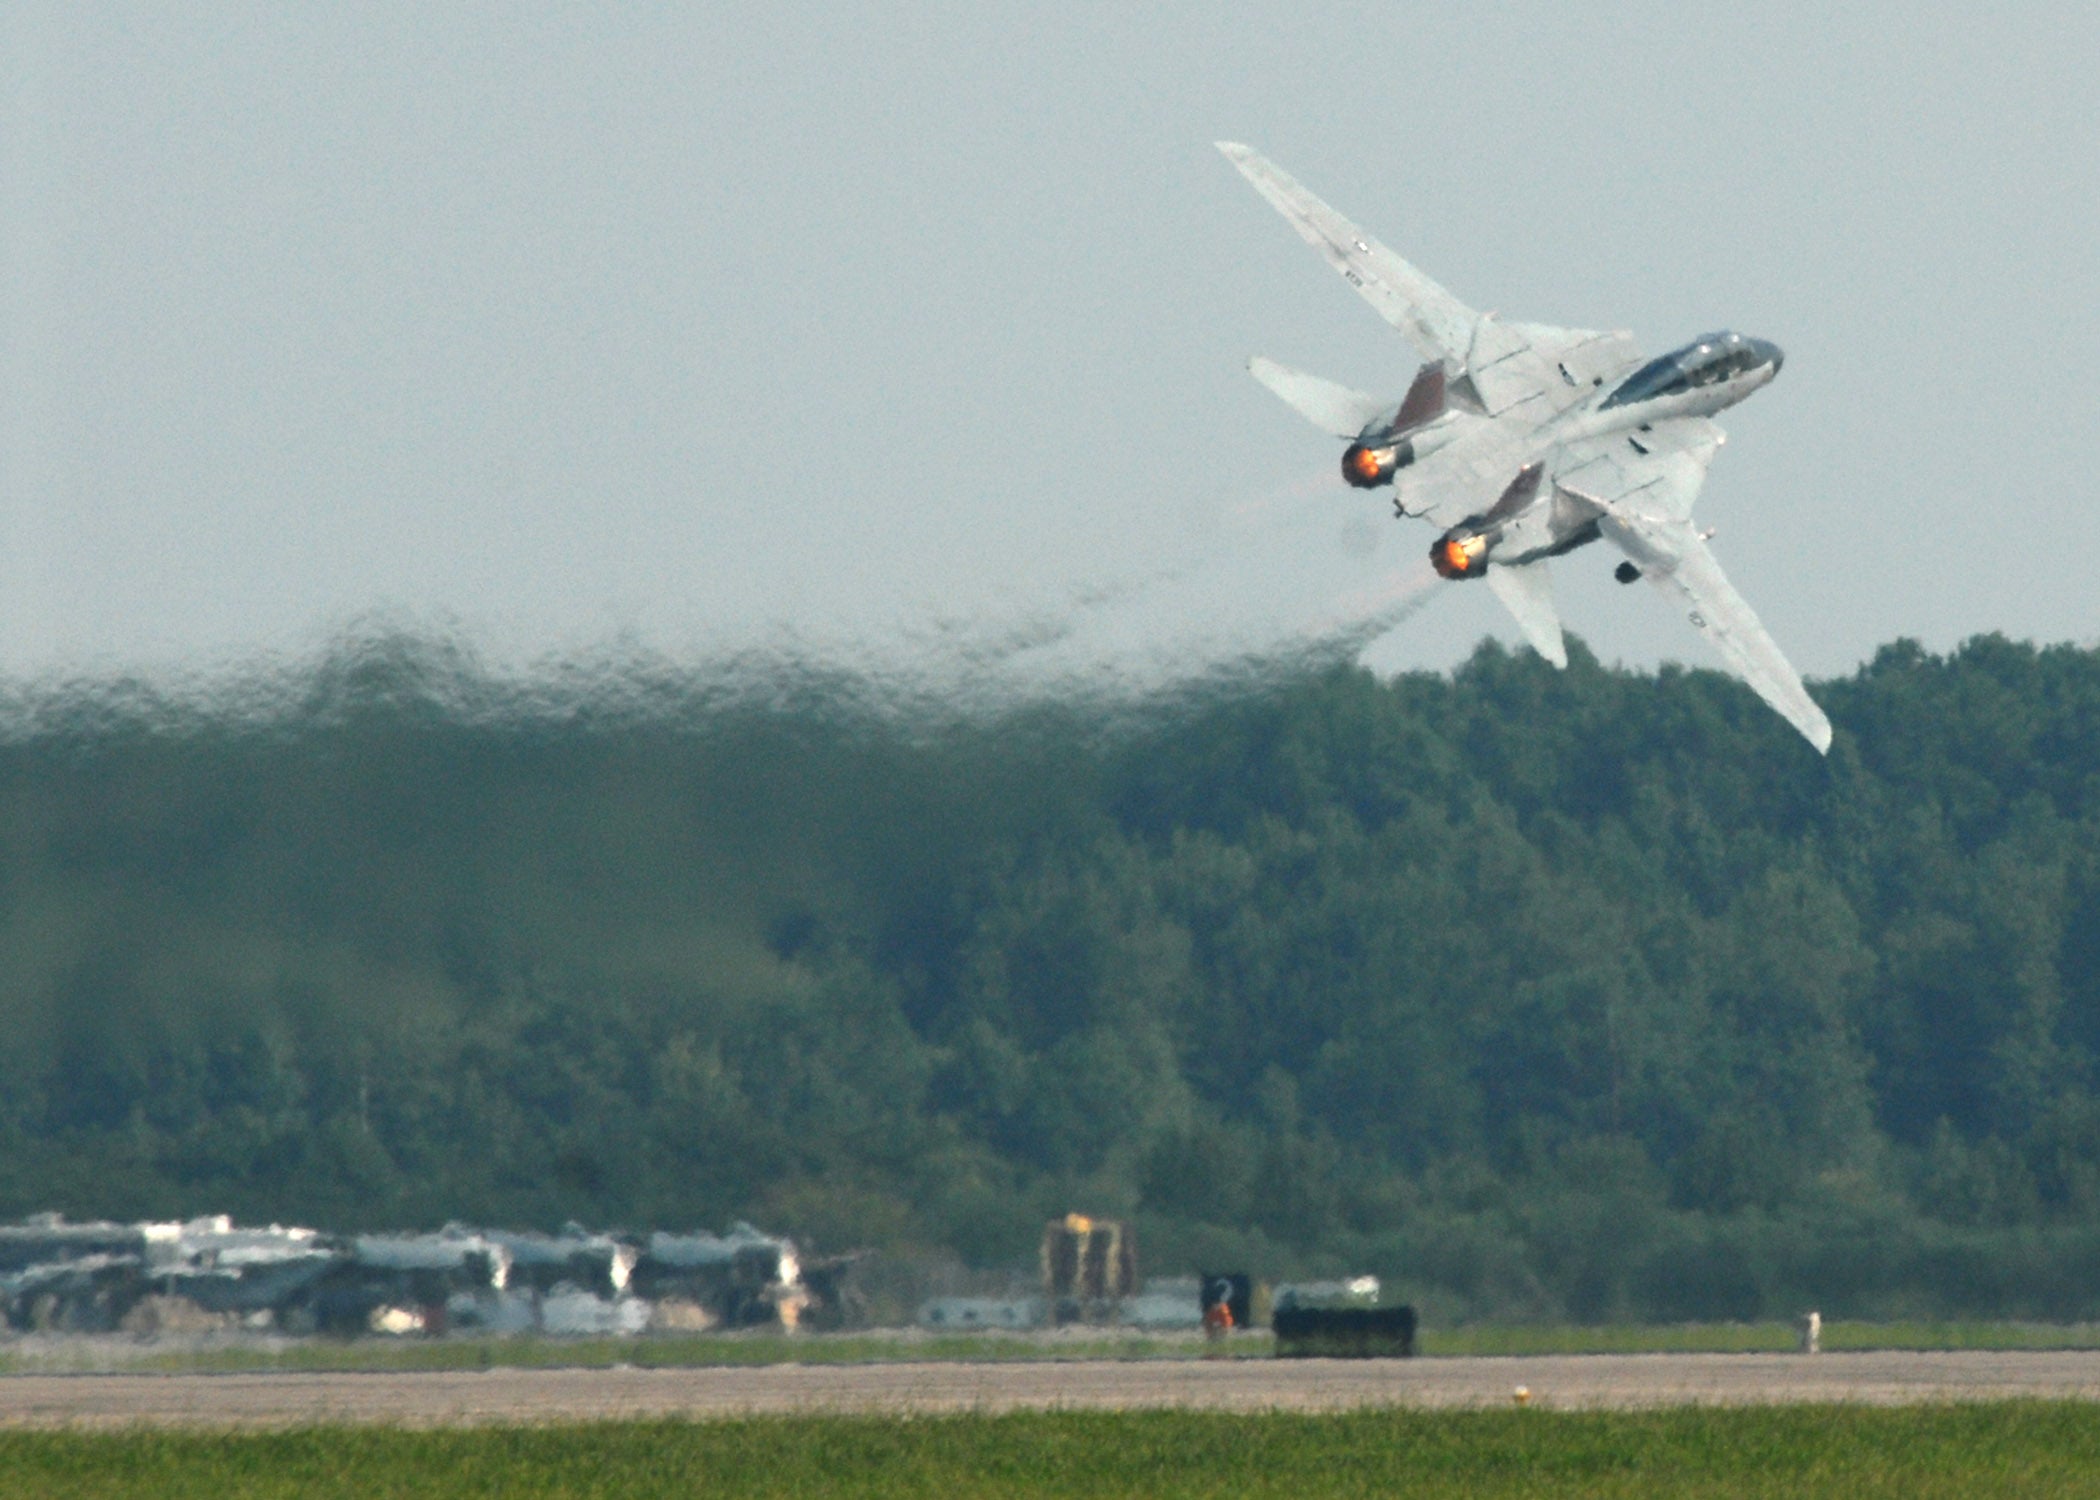 060910-N-1129M-055
Virginia Beach, Va. (Sept. 8, 2006) - An F-14D Tomcat from Fighter Squadron Three One (VF-31) takes off at full afterburner for the last F-14 airshow demonstration ever. The 2006 Naval Air Station Oceana Air Show themed "Salute to the Blue Angels; 60 Years of Aerial Excellence", showcased civilian and military aircraft from the Nation's armed forces, providing lots of flight demonstrations and static displays.  U.S. Navy photo by Mass Communication Specialist 3rd Class Julian R. Moorefield III (RELEASED)